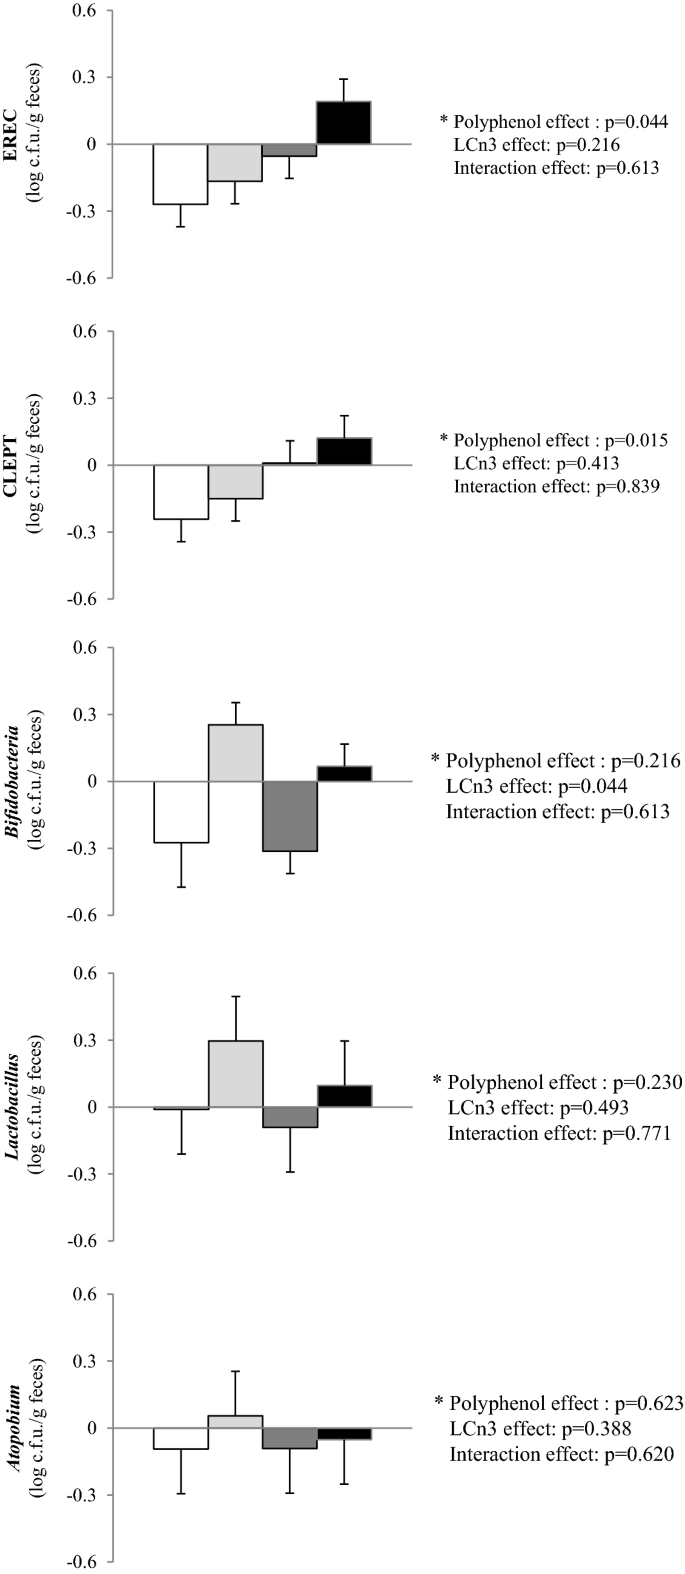 Diets Naturally Rich In Polyphenols And Or Long Chain N 3 Polyunsaturated Fatty Acids Differently Affect Microbiota Composition In High Cardiometabolic Risk Individuals Springerlink